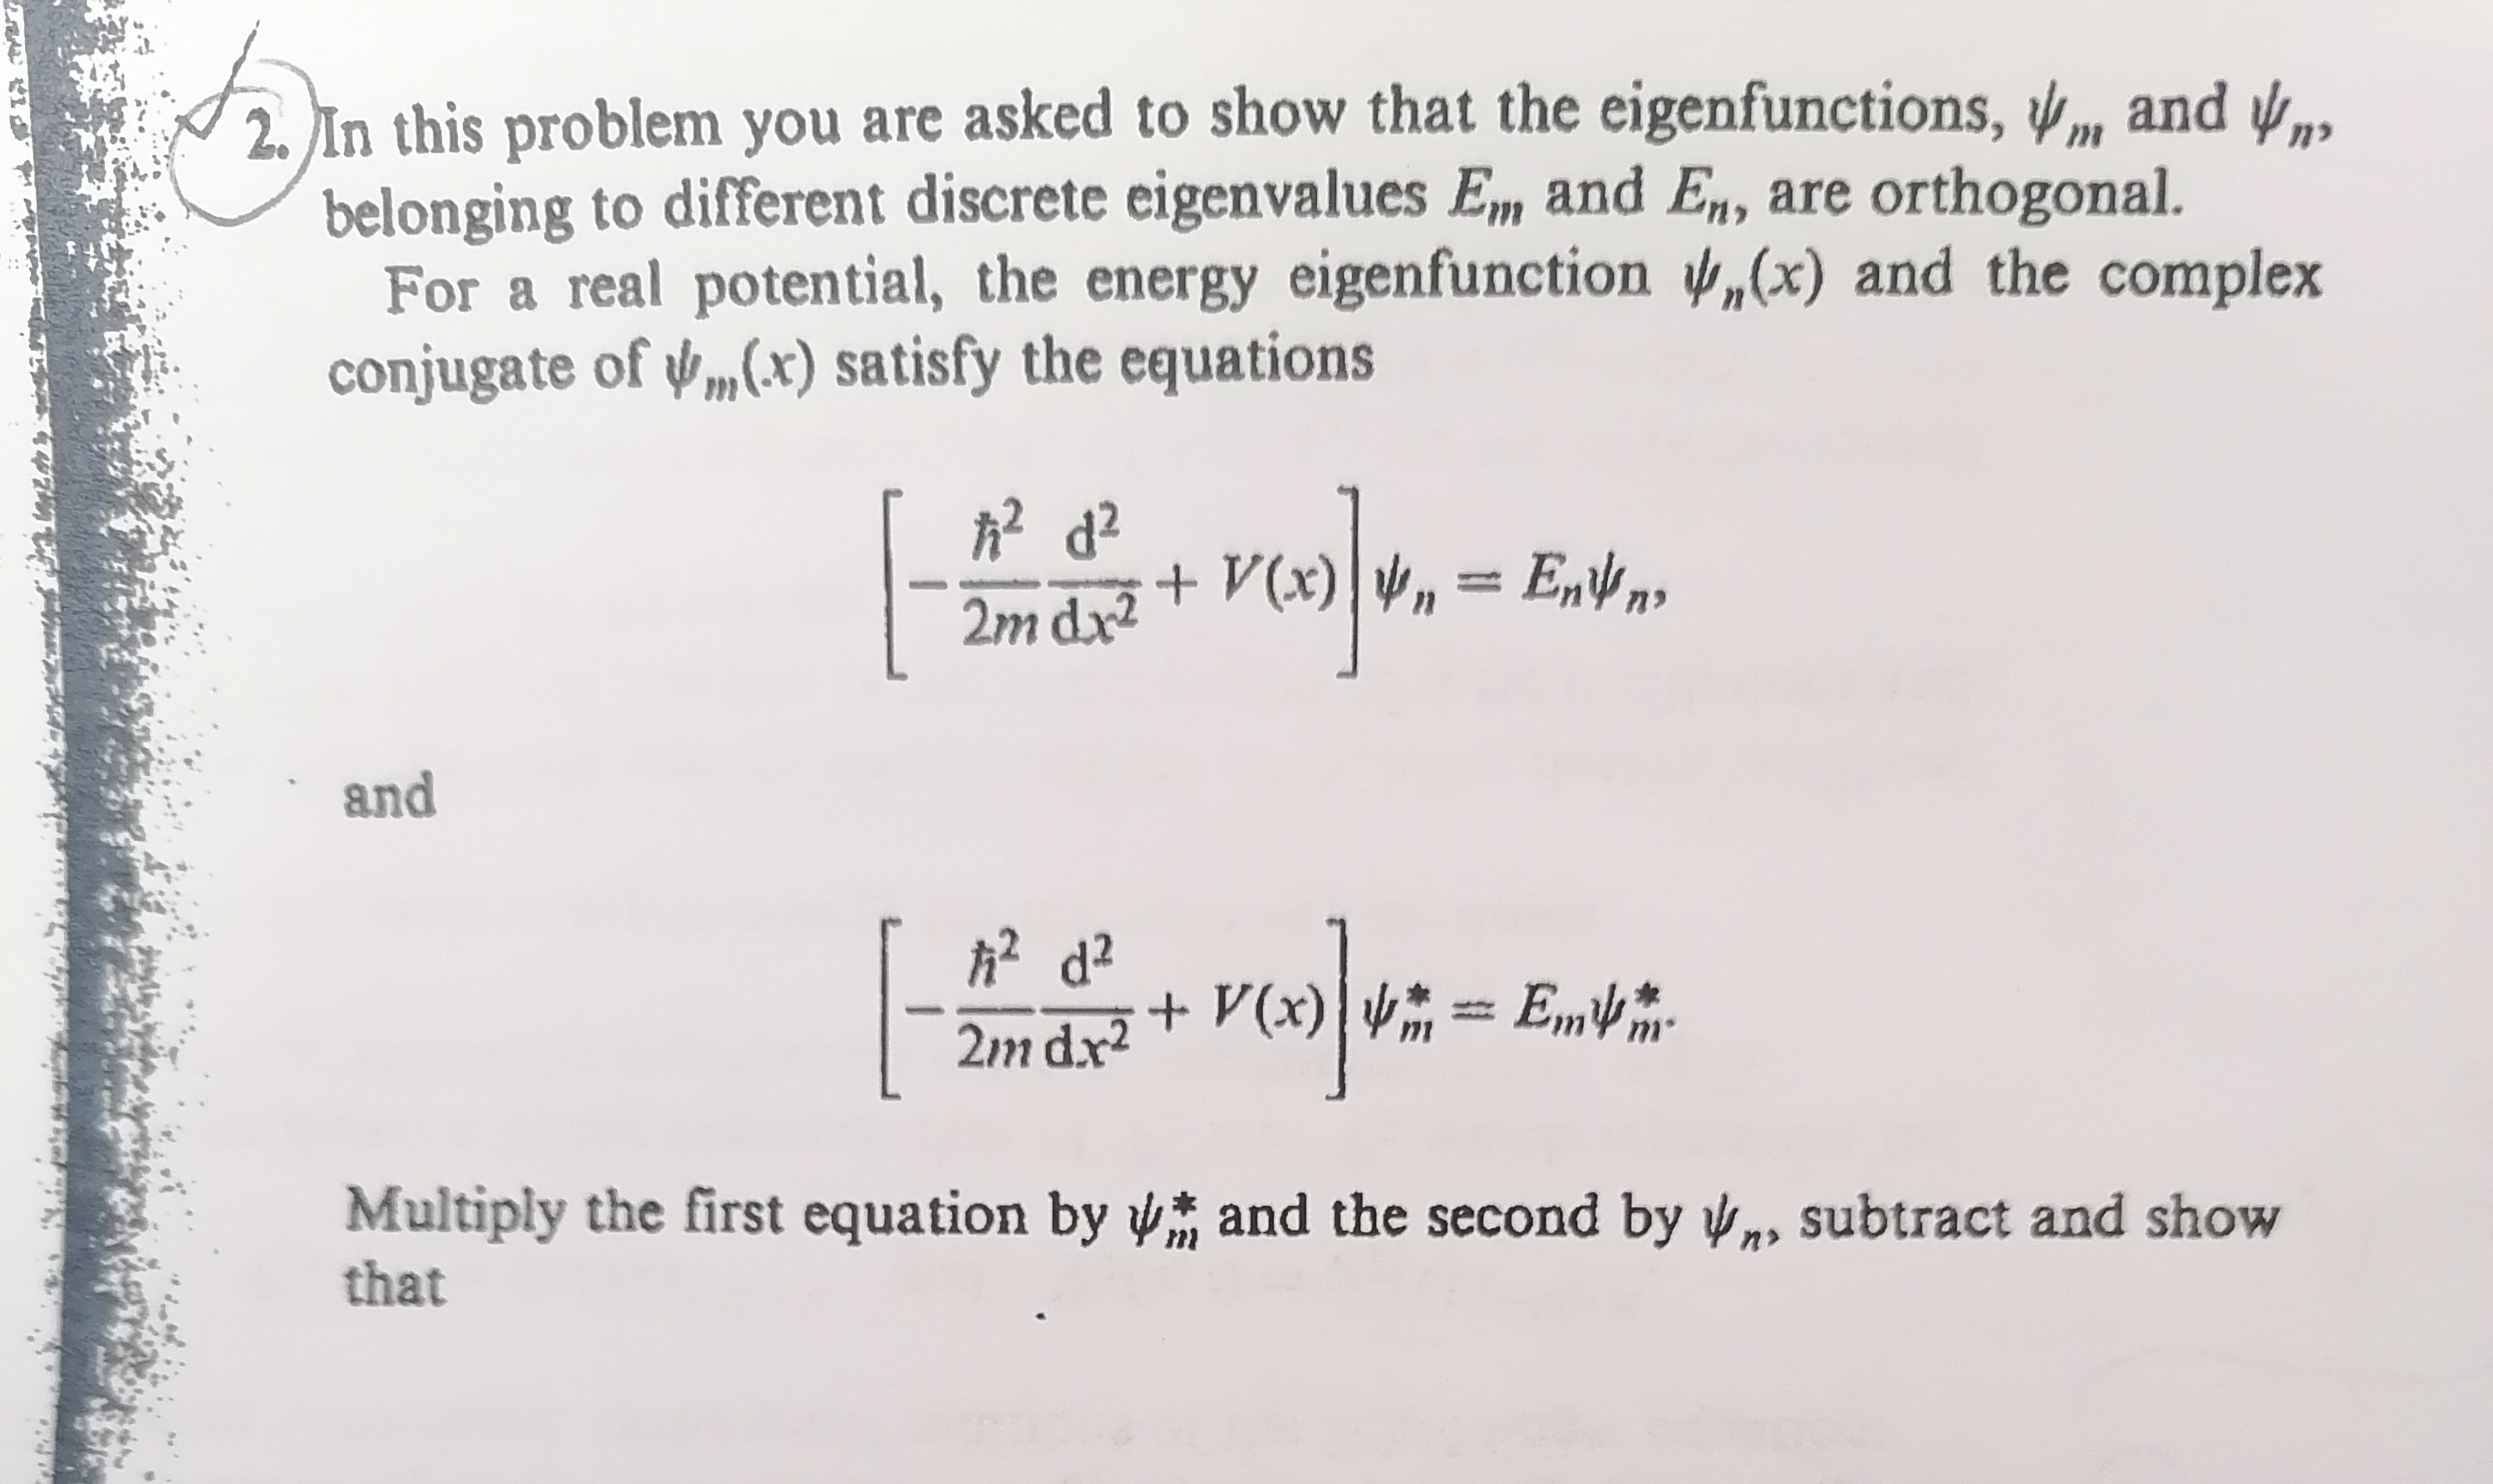 2. In this problem you are asked to show that the eigenfunctions, ψm and ψn, belonging to different discrete eigenvalues Em and En, are orthogonal.

For a real potential, the energy eigenfunction ψn(x) and the complex conjugate of ψm(x) satisfy the equations

    [-(ħ^2)/(2 m)(d^2)/( d x^2)+V(x)] ψn=Enψn

and

    [-(ħ^2)/(2 m)(d^2)/( d x^2)+V(x)] ψm^*=Emψm^*

Multiply the first equation by ψm^* and the second by ψn, subtract and show that